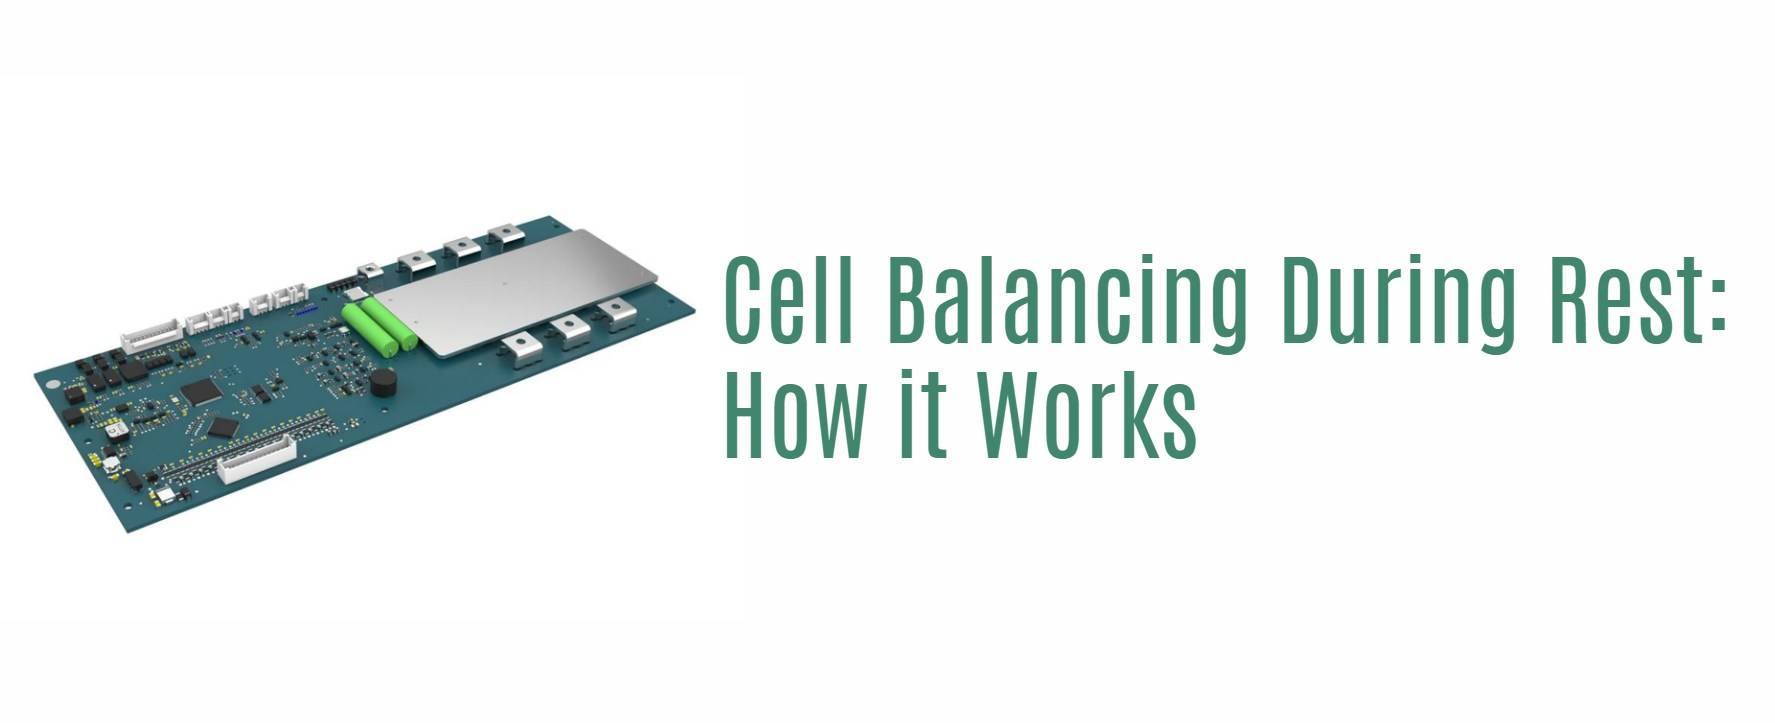 Cell Balancing During Rest: How it Works